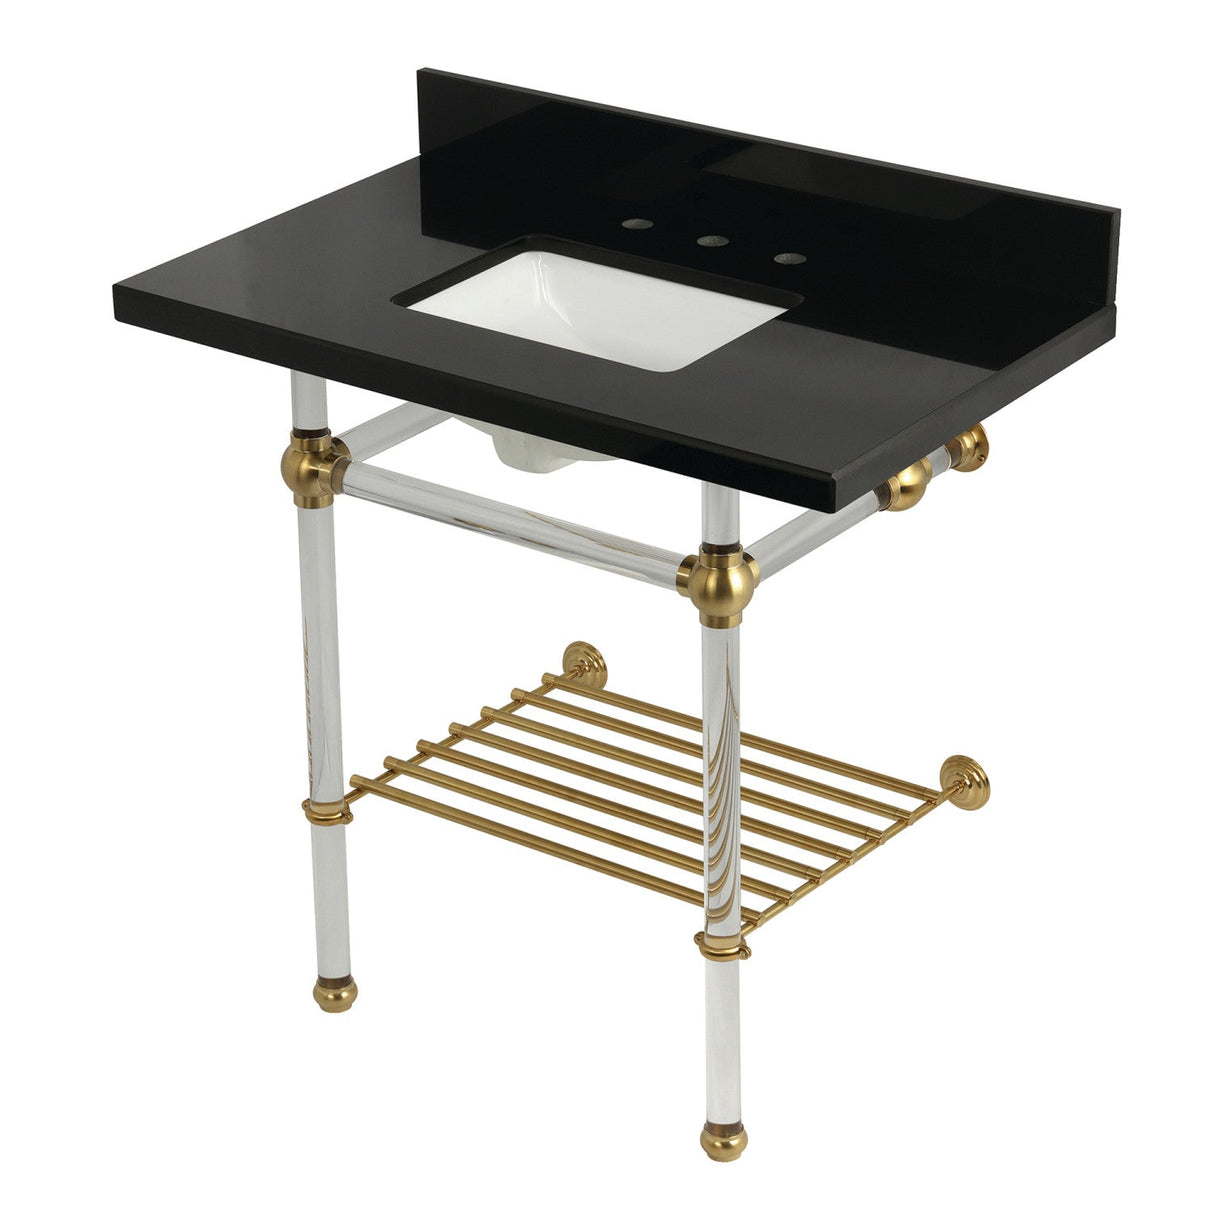 Templeton KVPK36KASQB7 36-Inch Console Sink with Acrylic Legs (8-Inch, 3 Hole), Black Granite/Brushed Brass